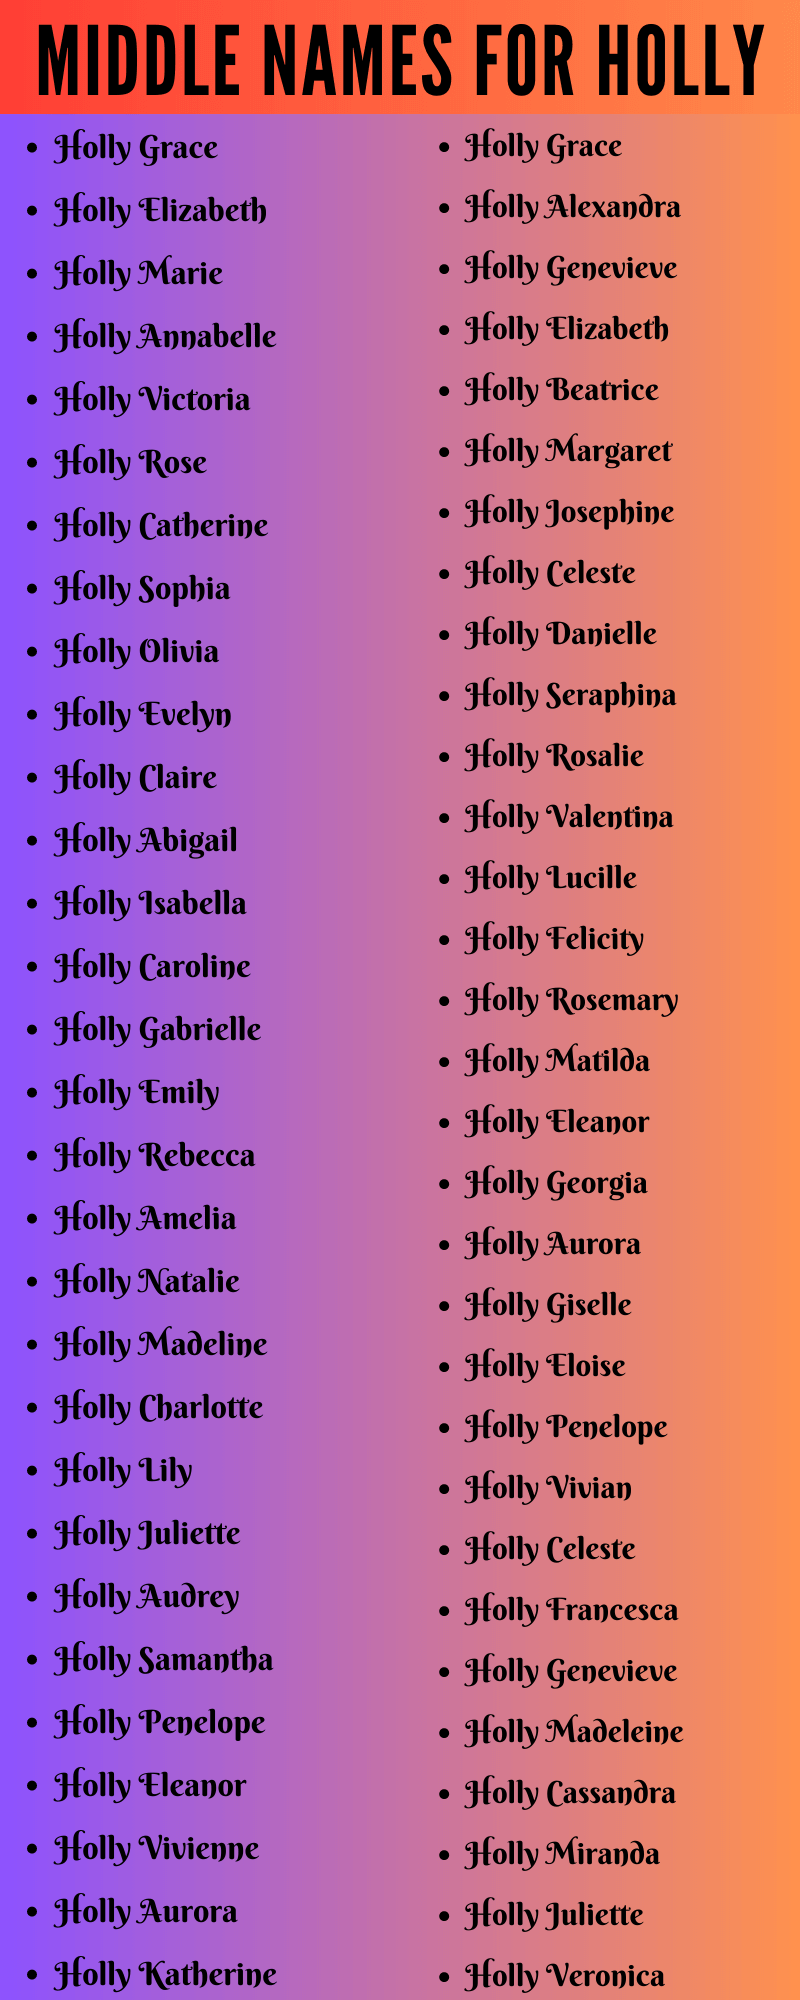 400 Unique Middle Names For Holly